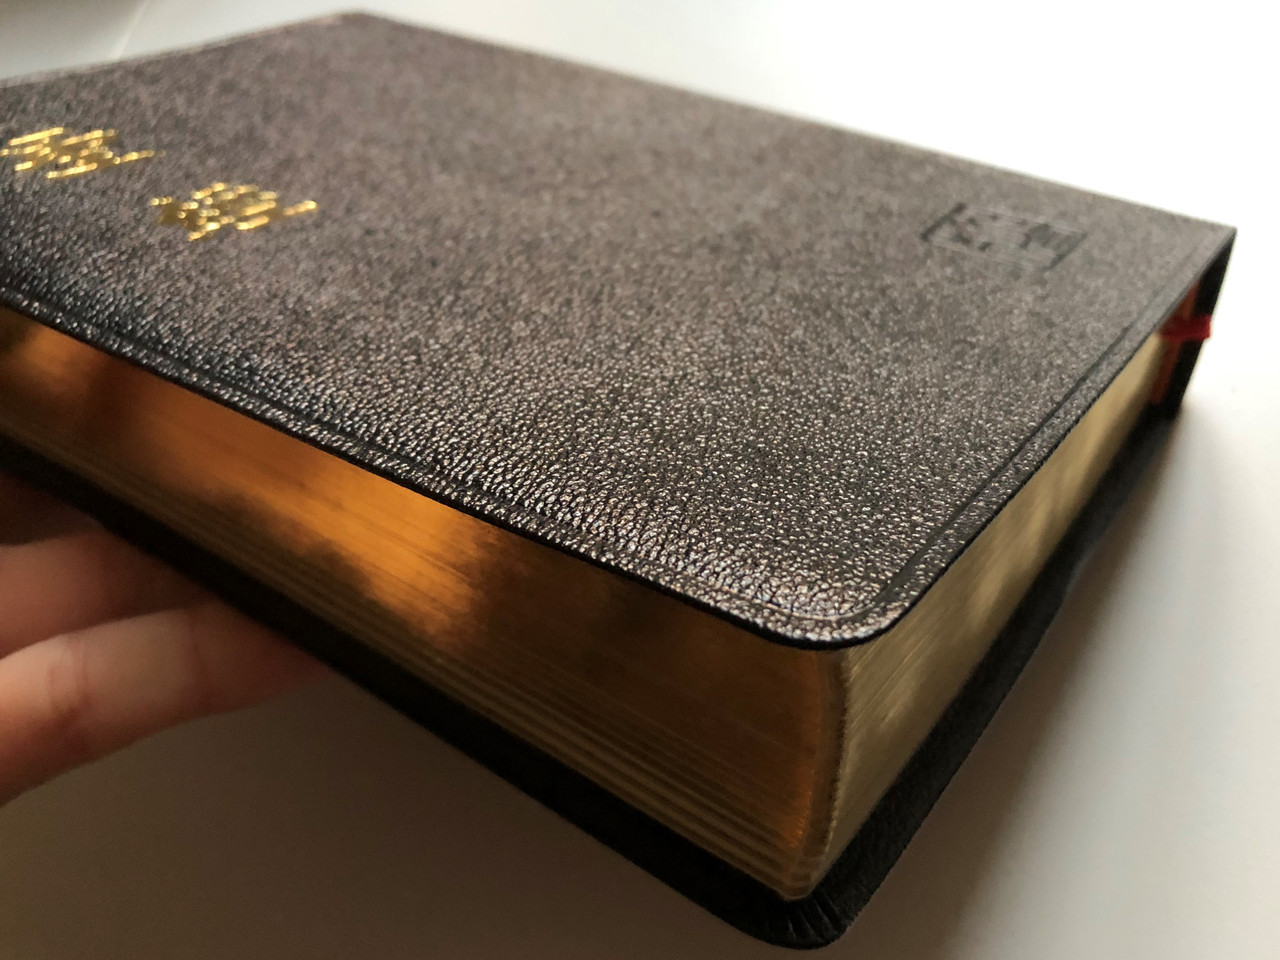 https://cdn10.bigcommerce.com/s-62bdpkt7pb/products/50657/images/258371/Shangti_Edition_Chinese_Holy_Bible_17__22922.1668176461.1280.1280.JPG?c=2